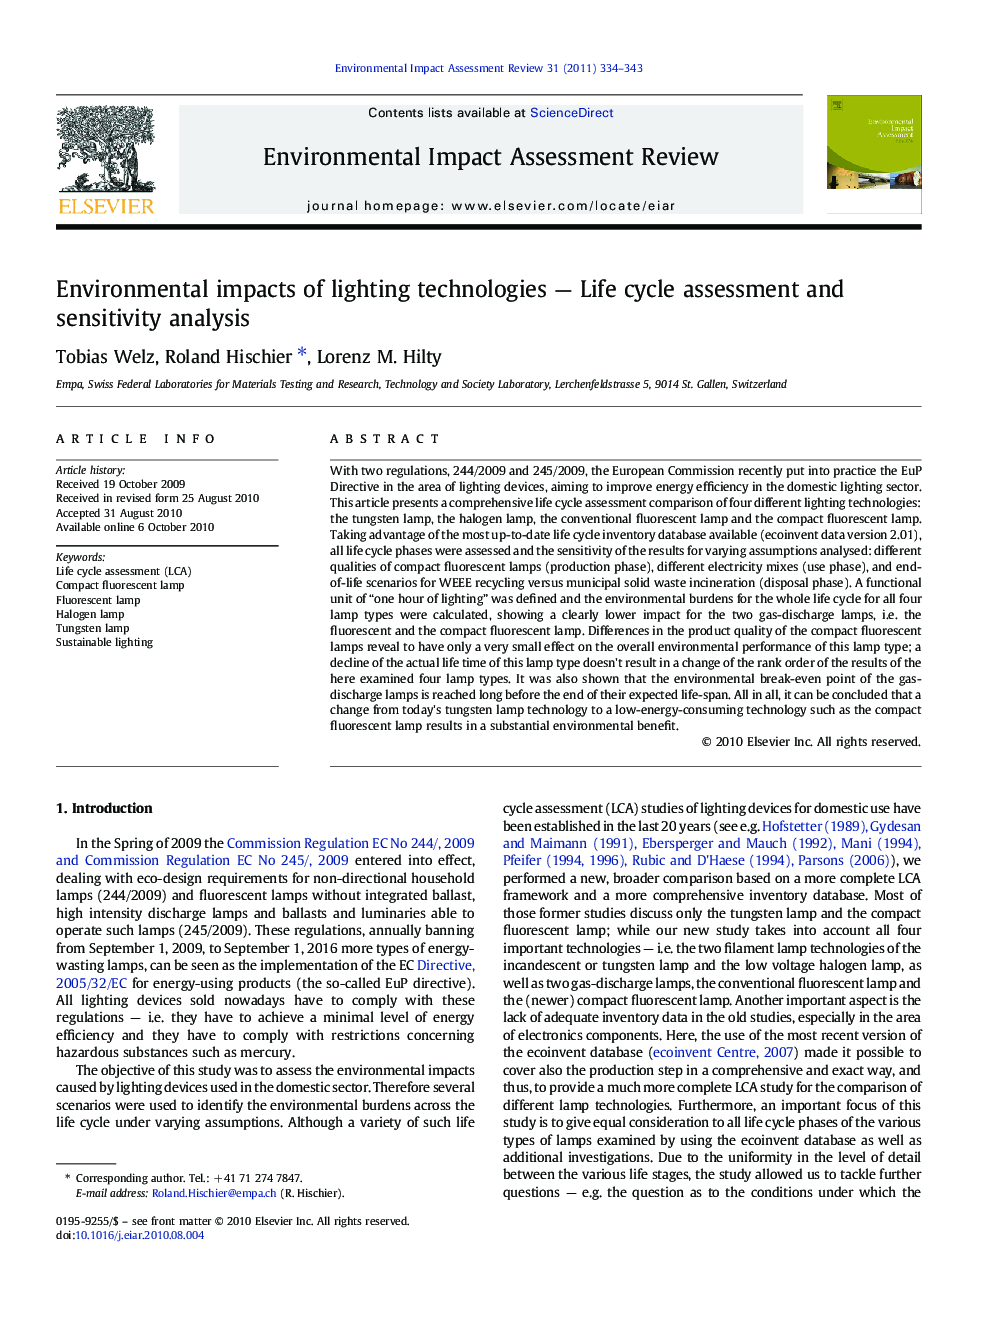 Environmental impacts of lighting technologies — Life cycle assessment and sensitivity analysis